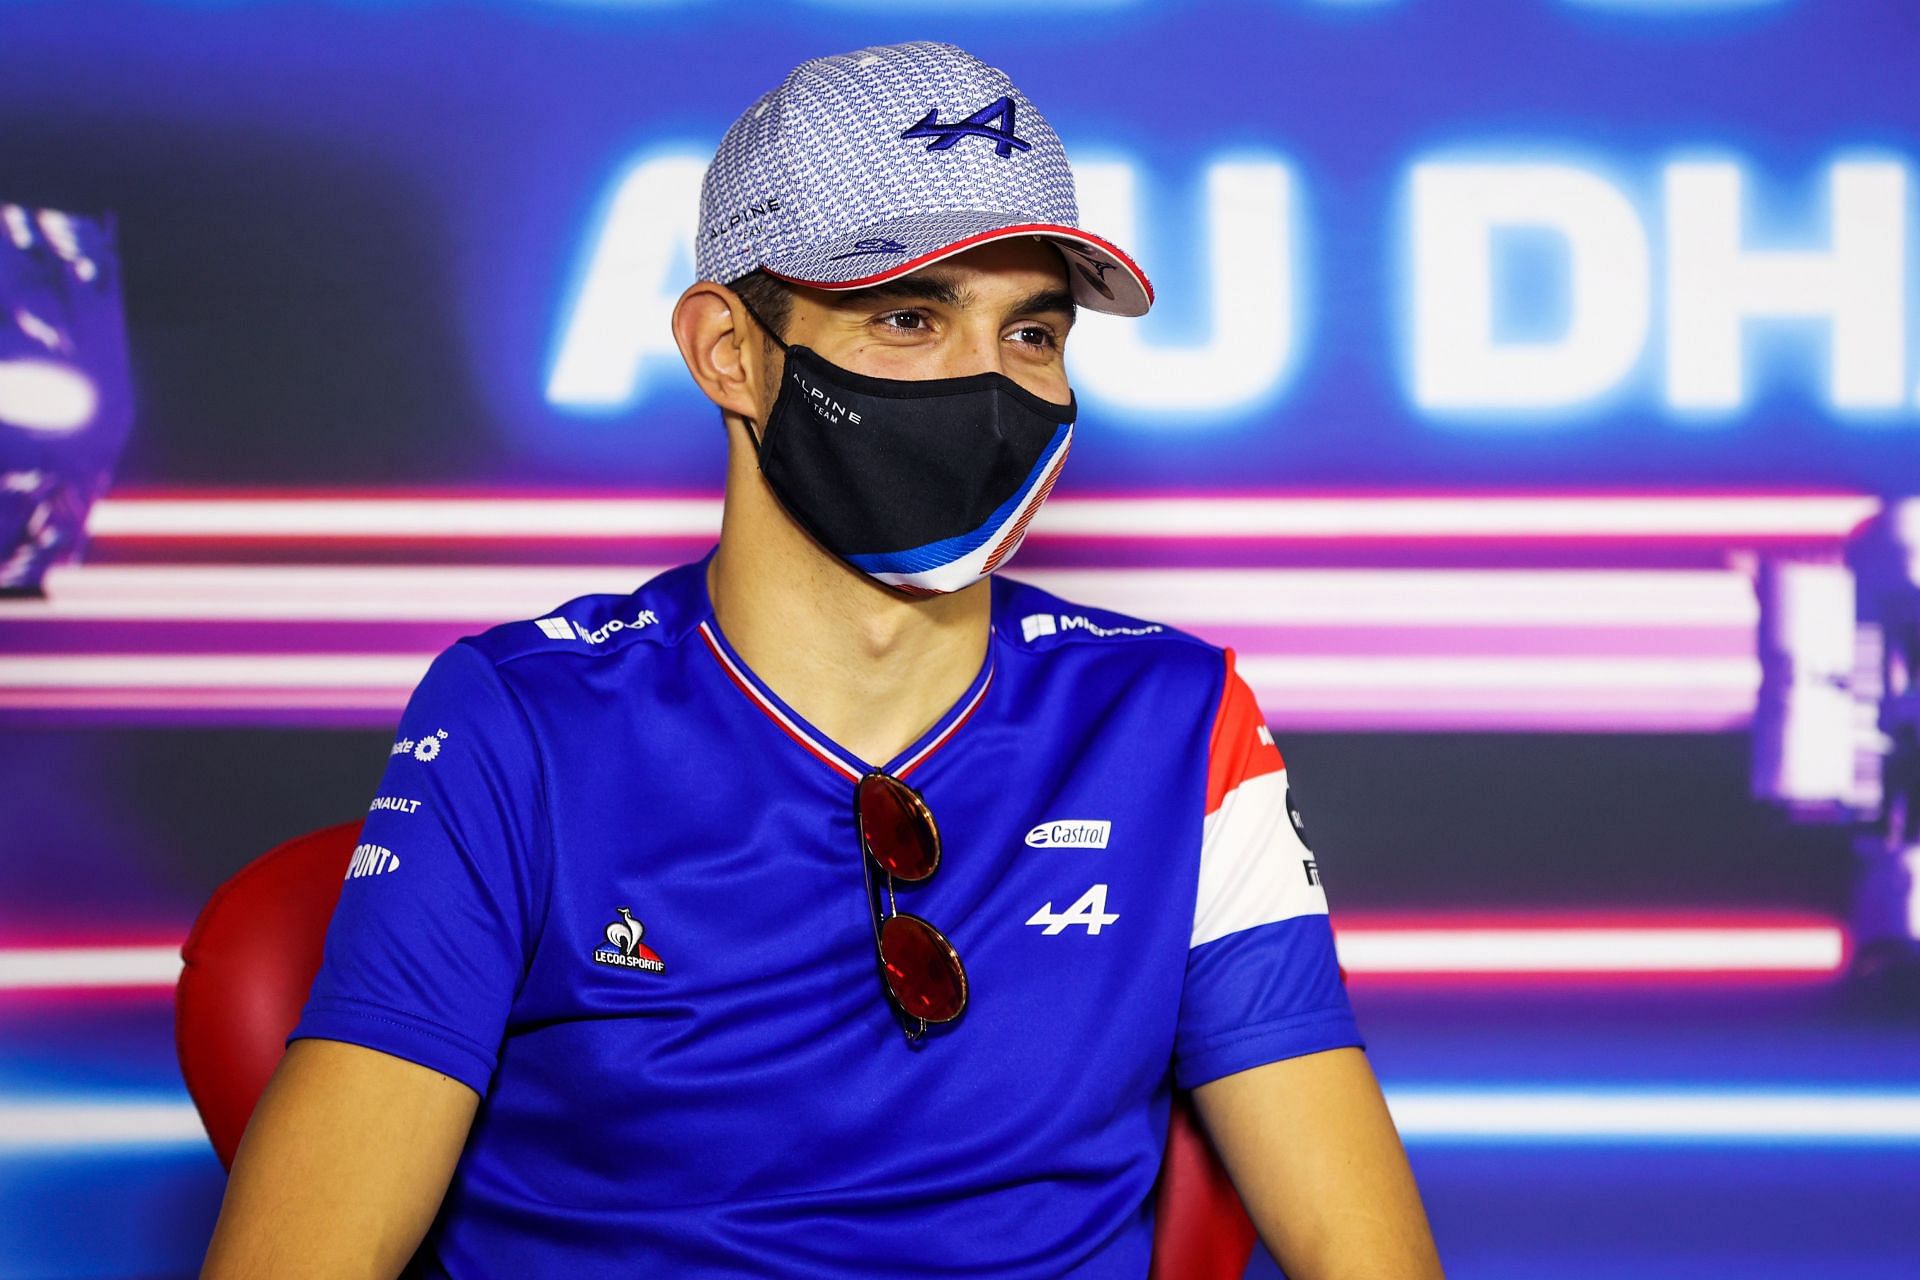 Esteban Ocon talks in the Drivers&#039; Press Conference during previews ahead of the F1 race in Abu Dhabi (Photo by Antonin Vincent - Pool/Getty Images)